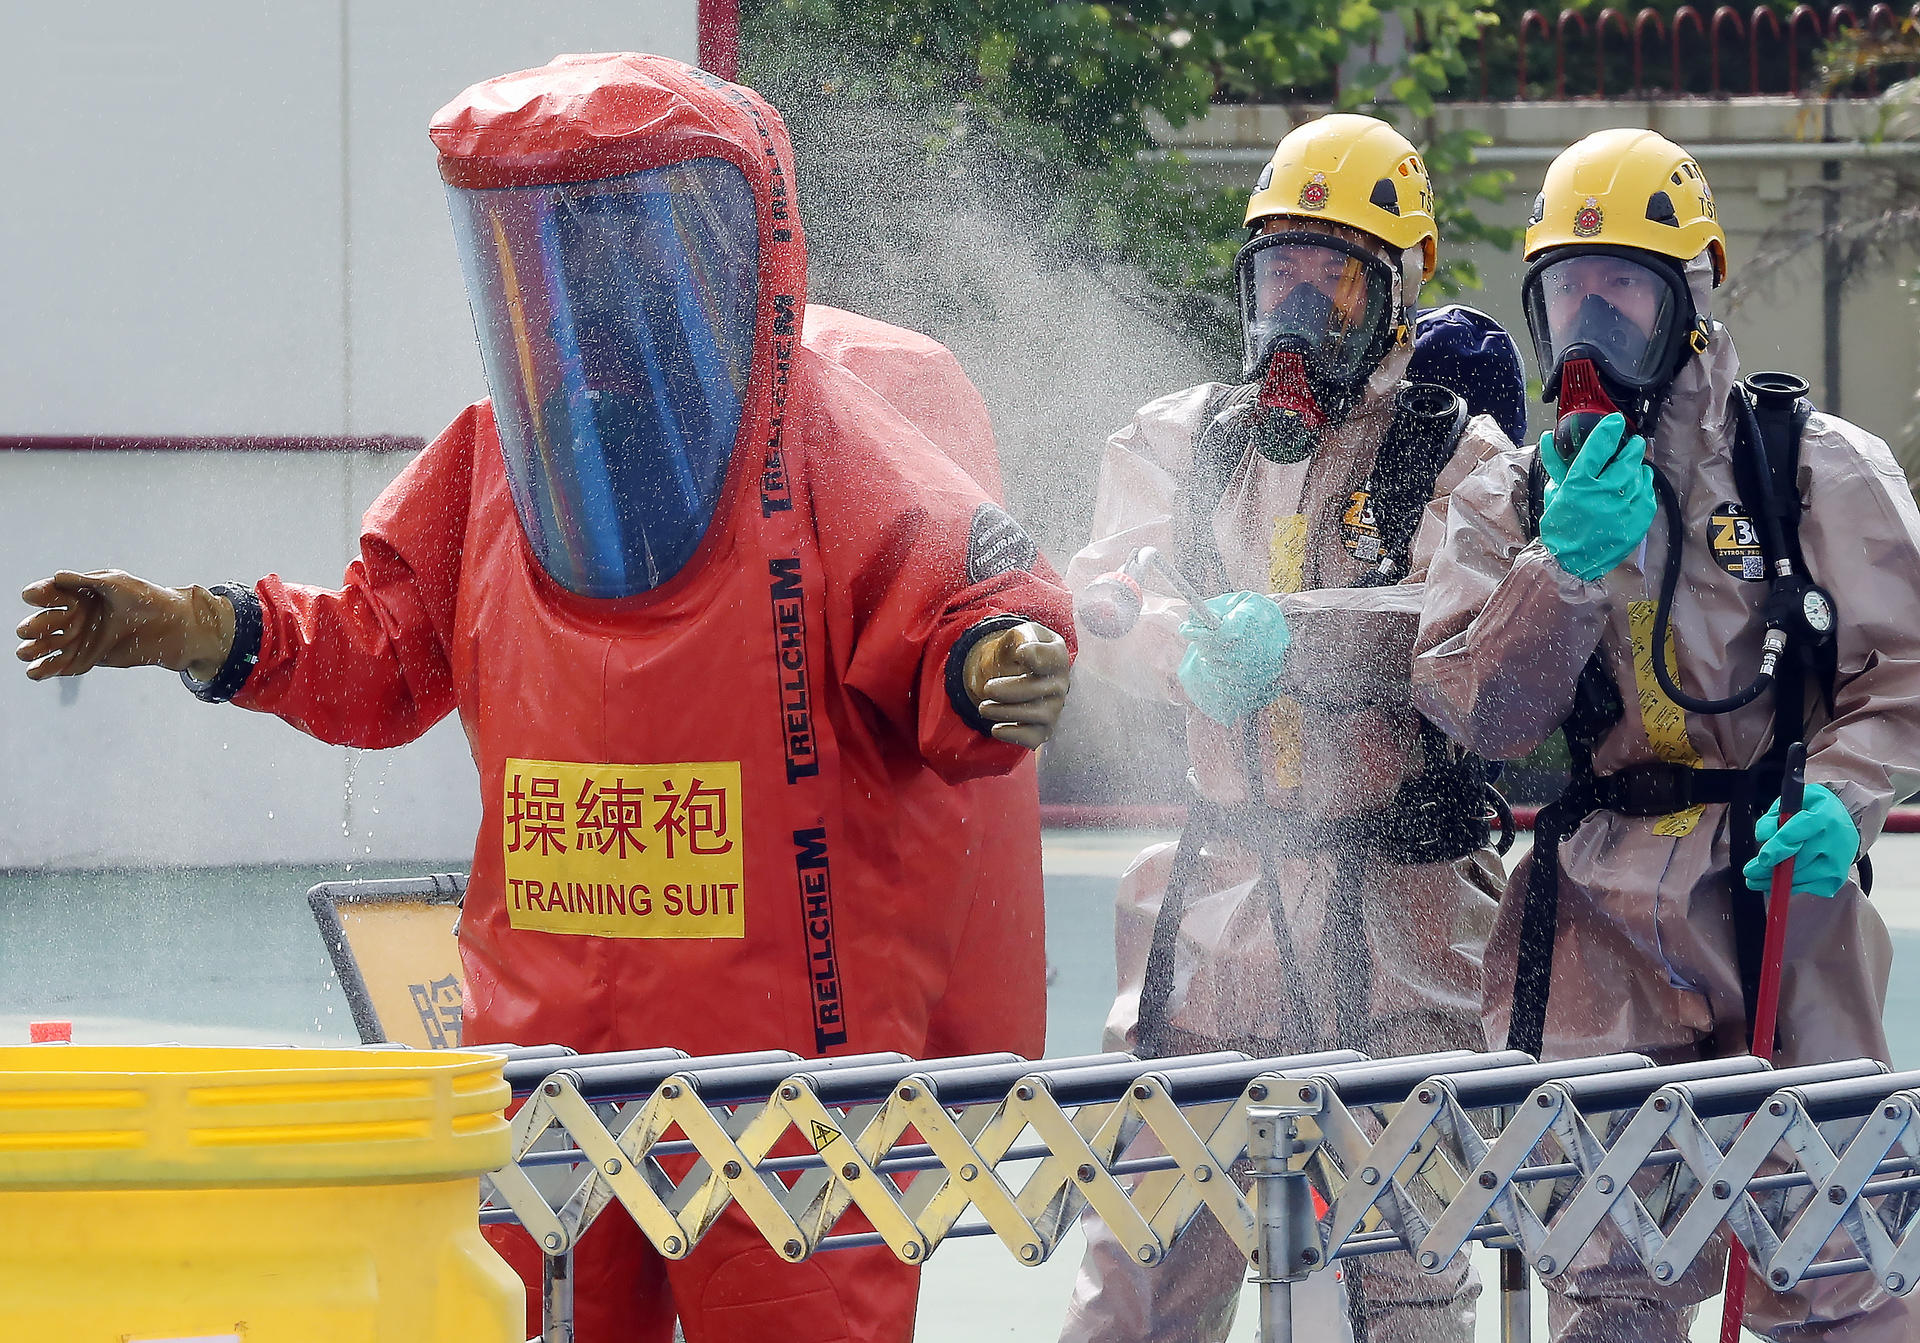 Hazmat team members in Sha Tin yesterday demonstrate how hazardous material incidents are handled.Photo: Edward Wong